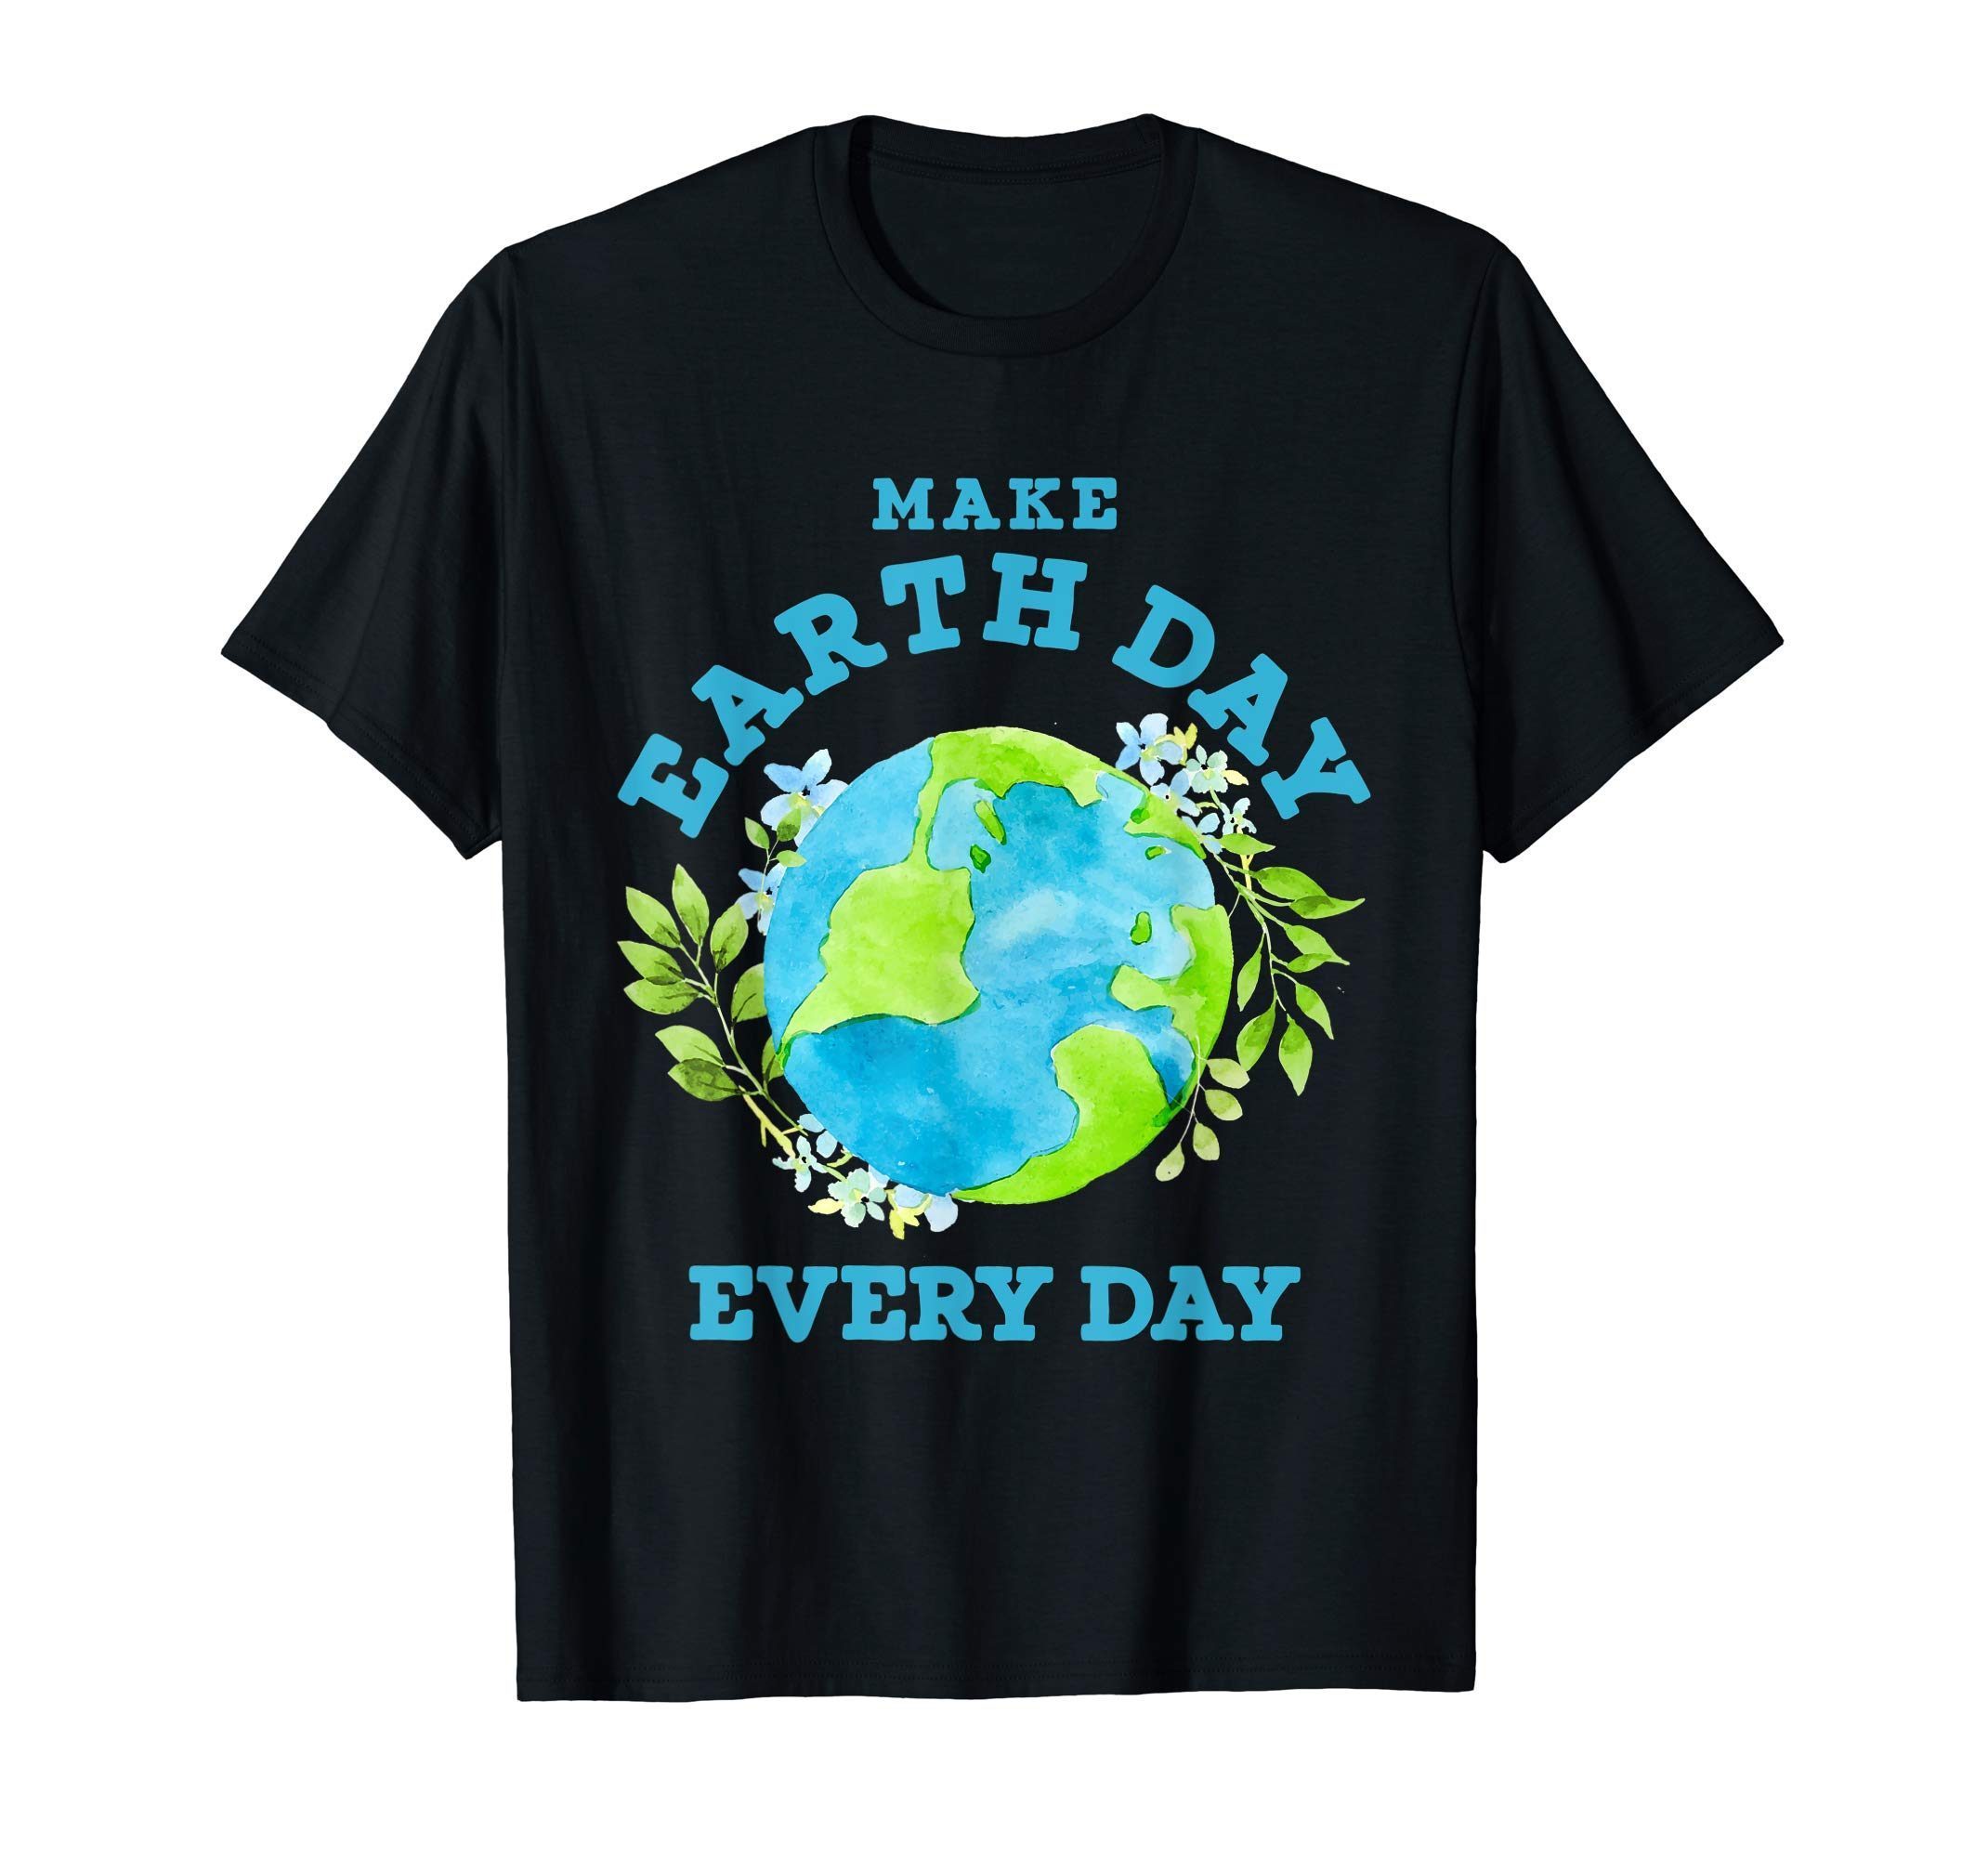 Make Earth Day Every Day T Shirt For Green Earth Lover - Reviewshirts ...